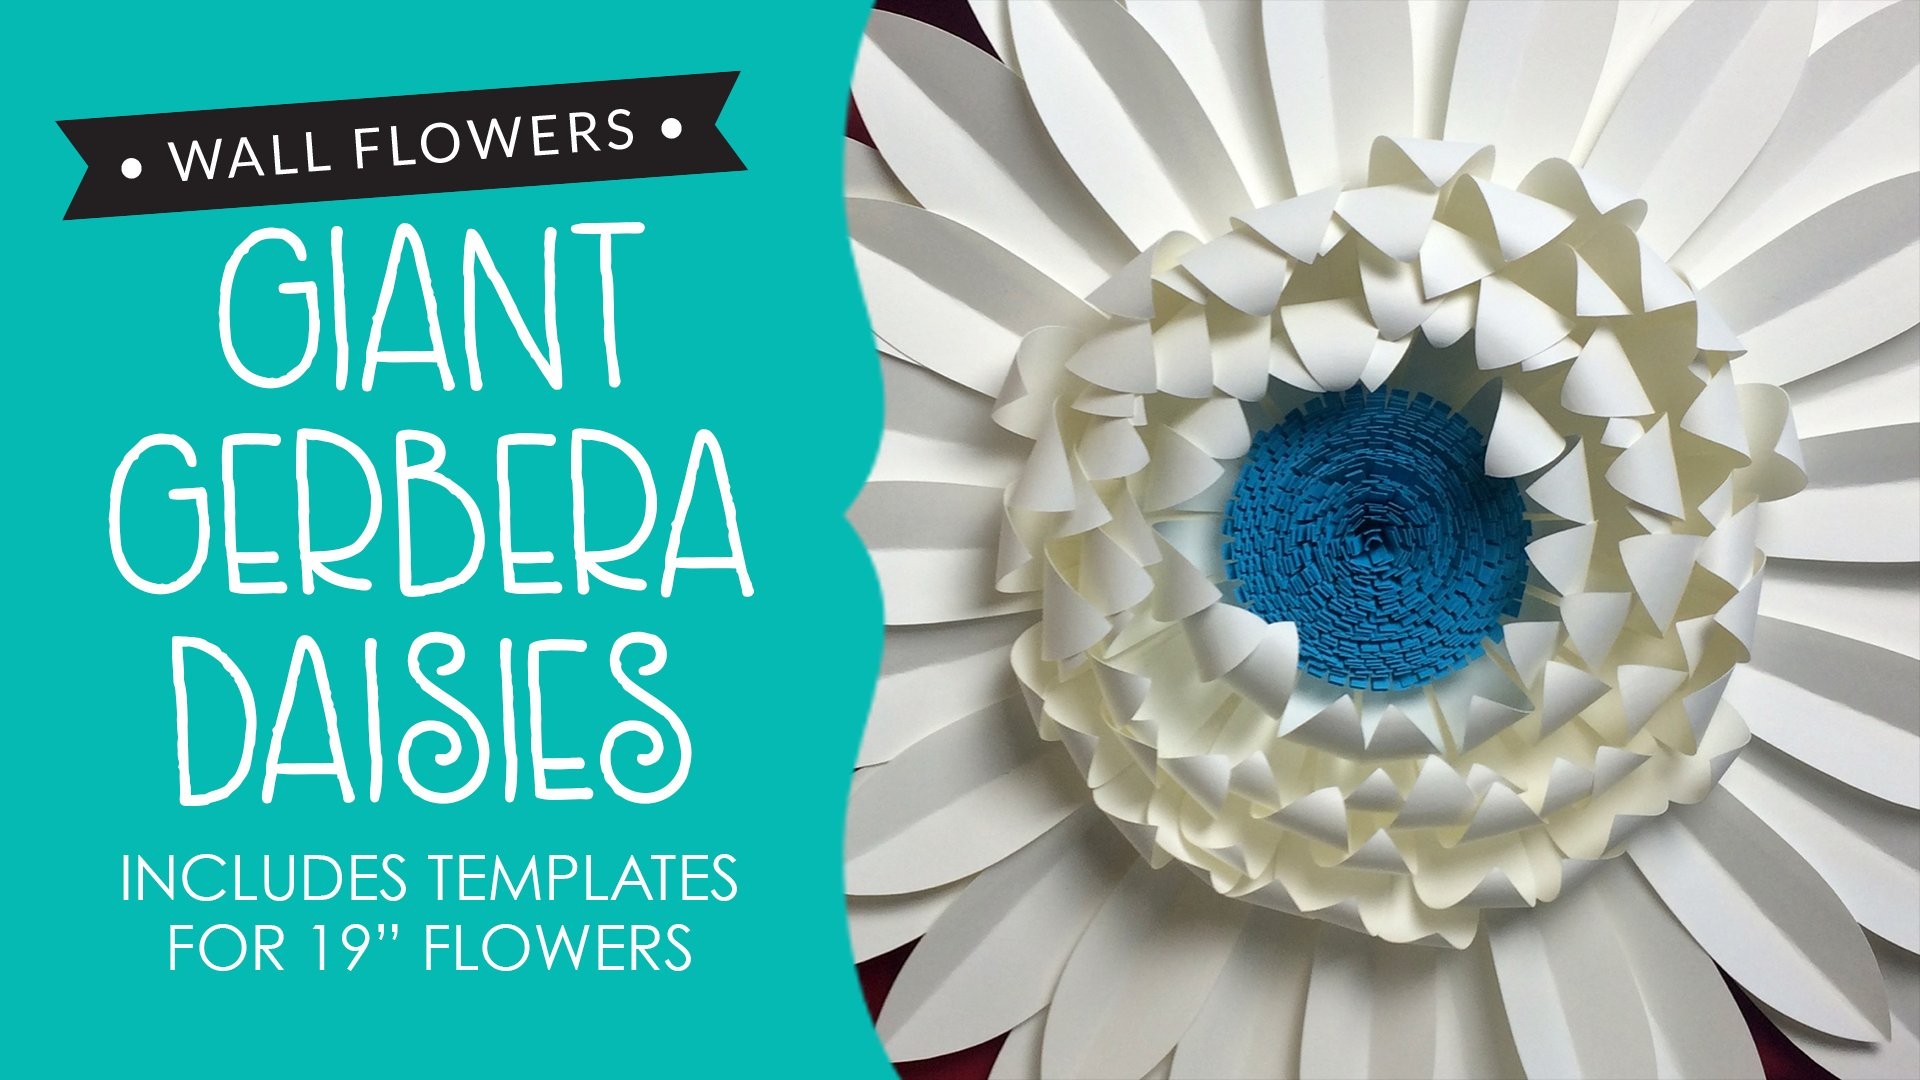 Wall Flowers Giant Gerbera Daisies Includes Templates Heather Gerber Daisy Template